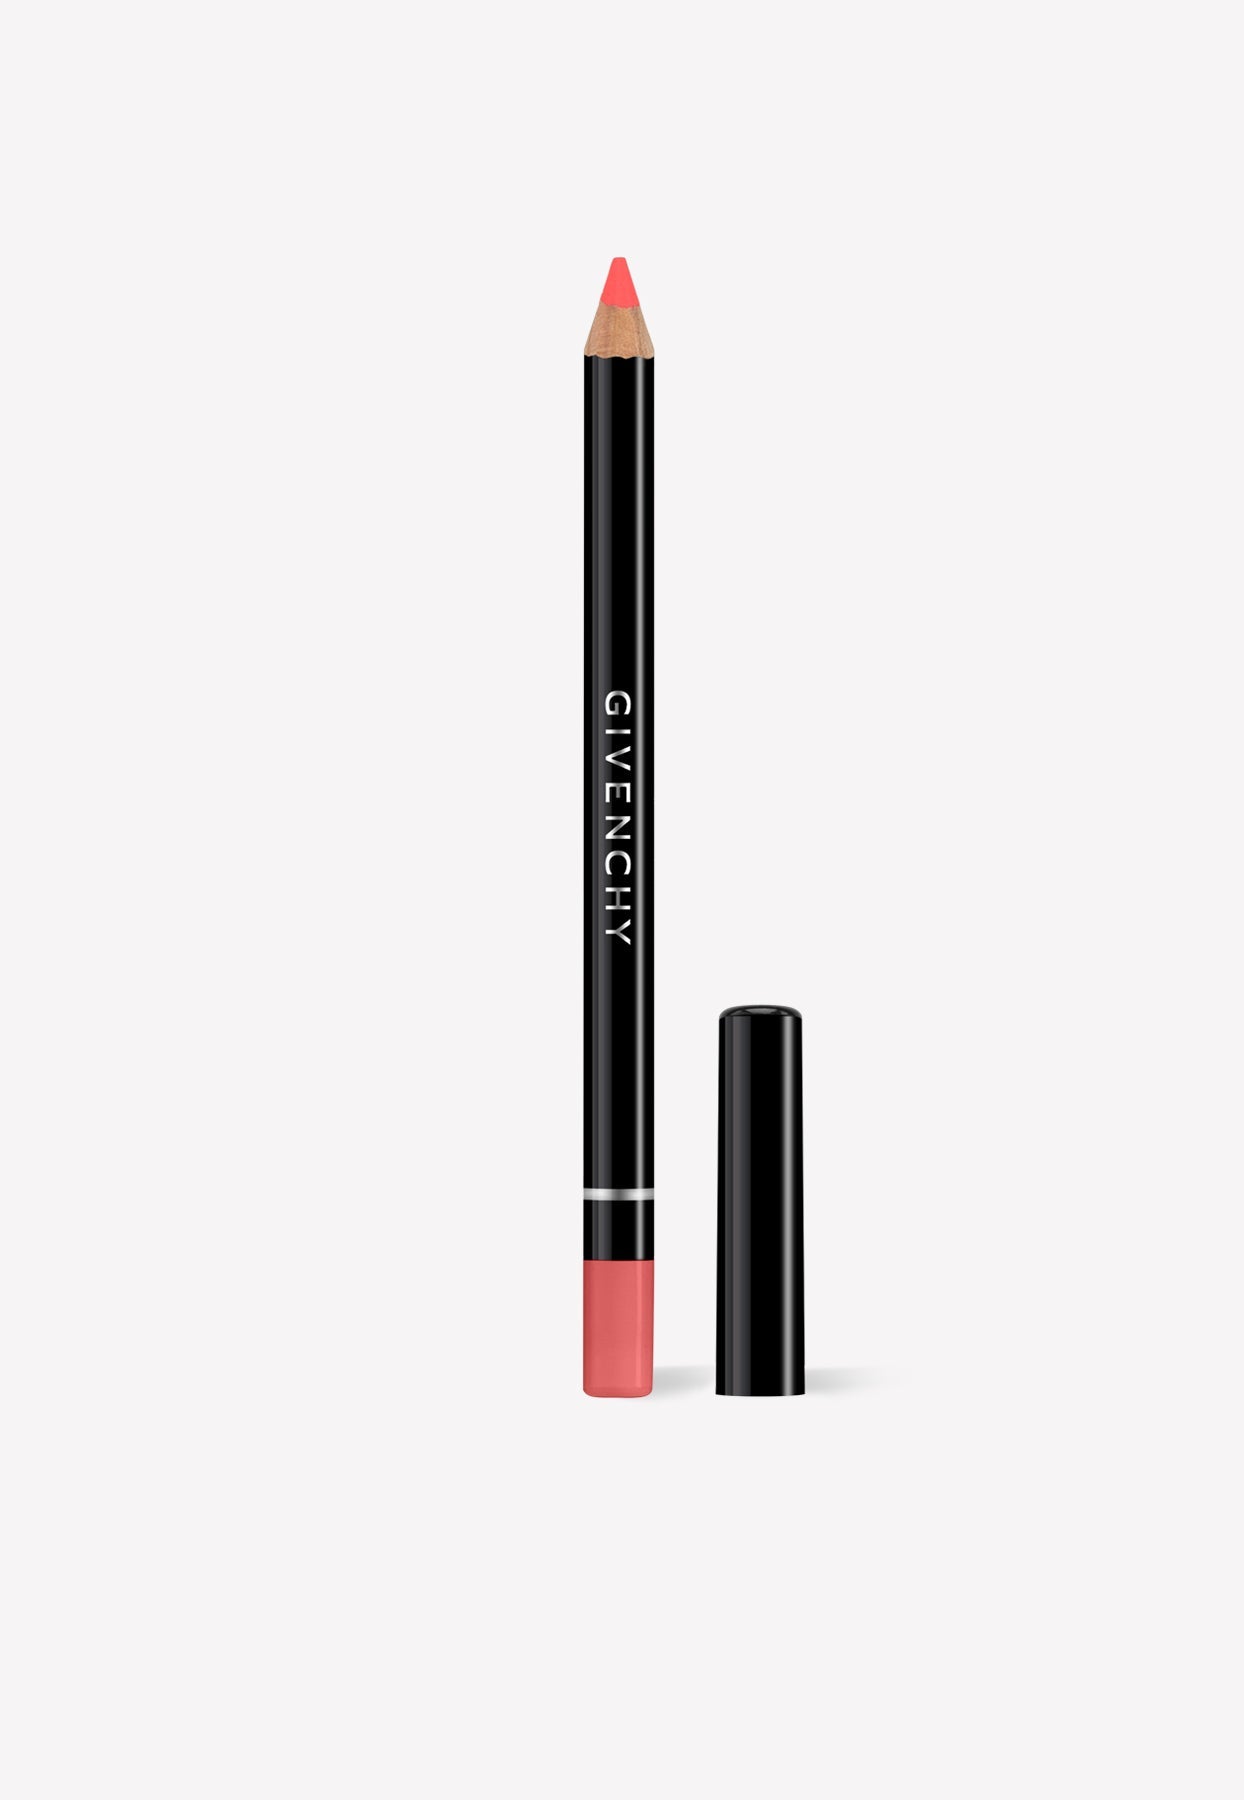 GIVENCHY WATERPROOF LIP LINER WITH SHARPENER - N° 5 CORAIL DECOLLETE